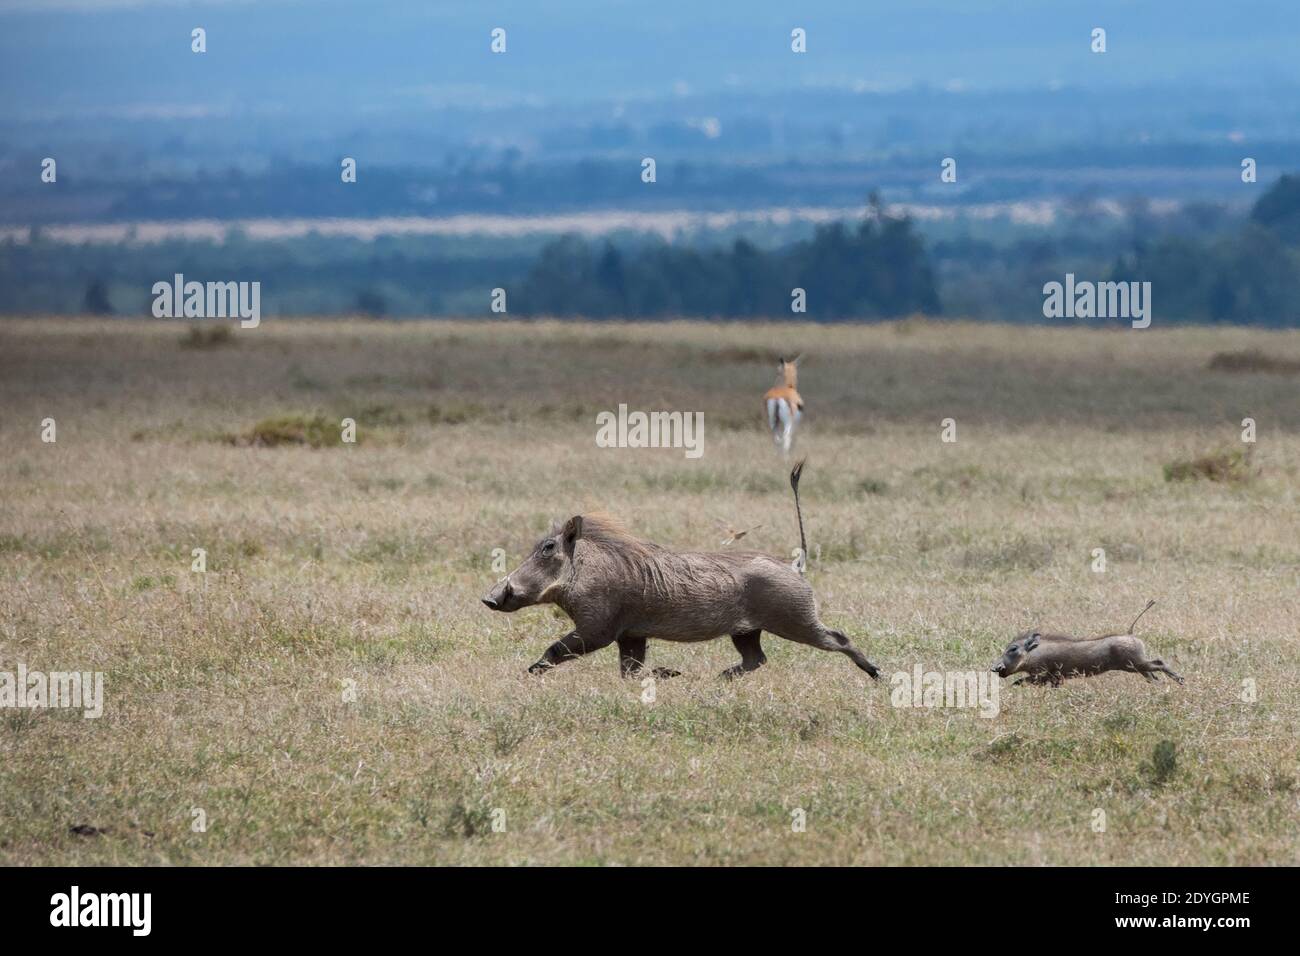 Africa, Kenya, Laikipia Plateau, Northern Frontier District, Ol Pejeta Conservancy. Mother warthog running with baby (Wild: Phacochoerus africanus) Stock Photo